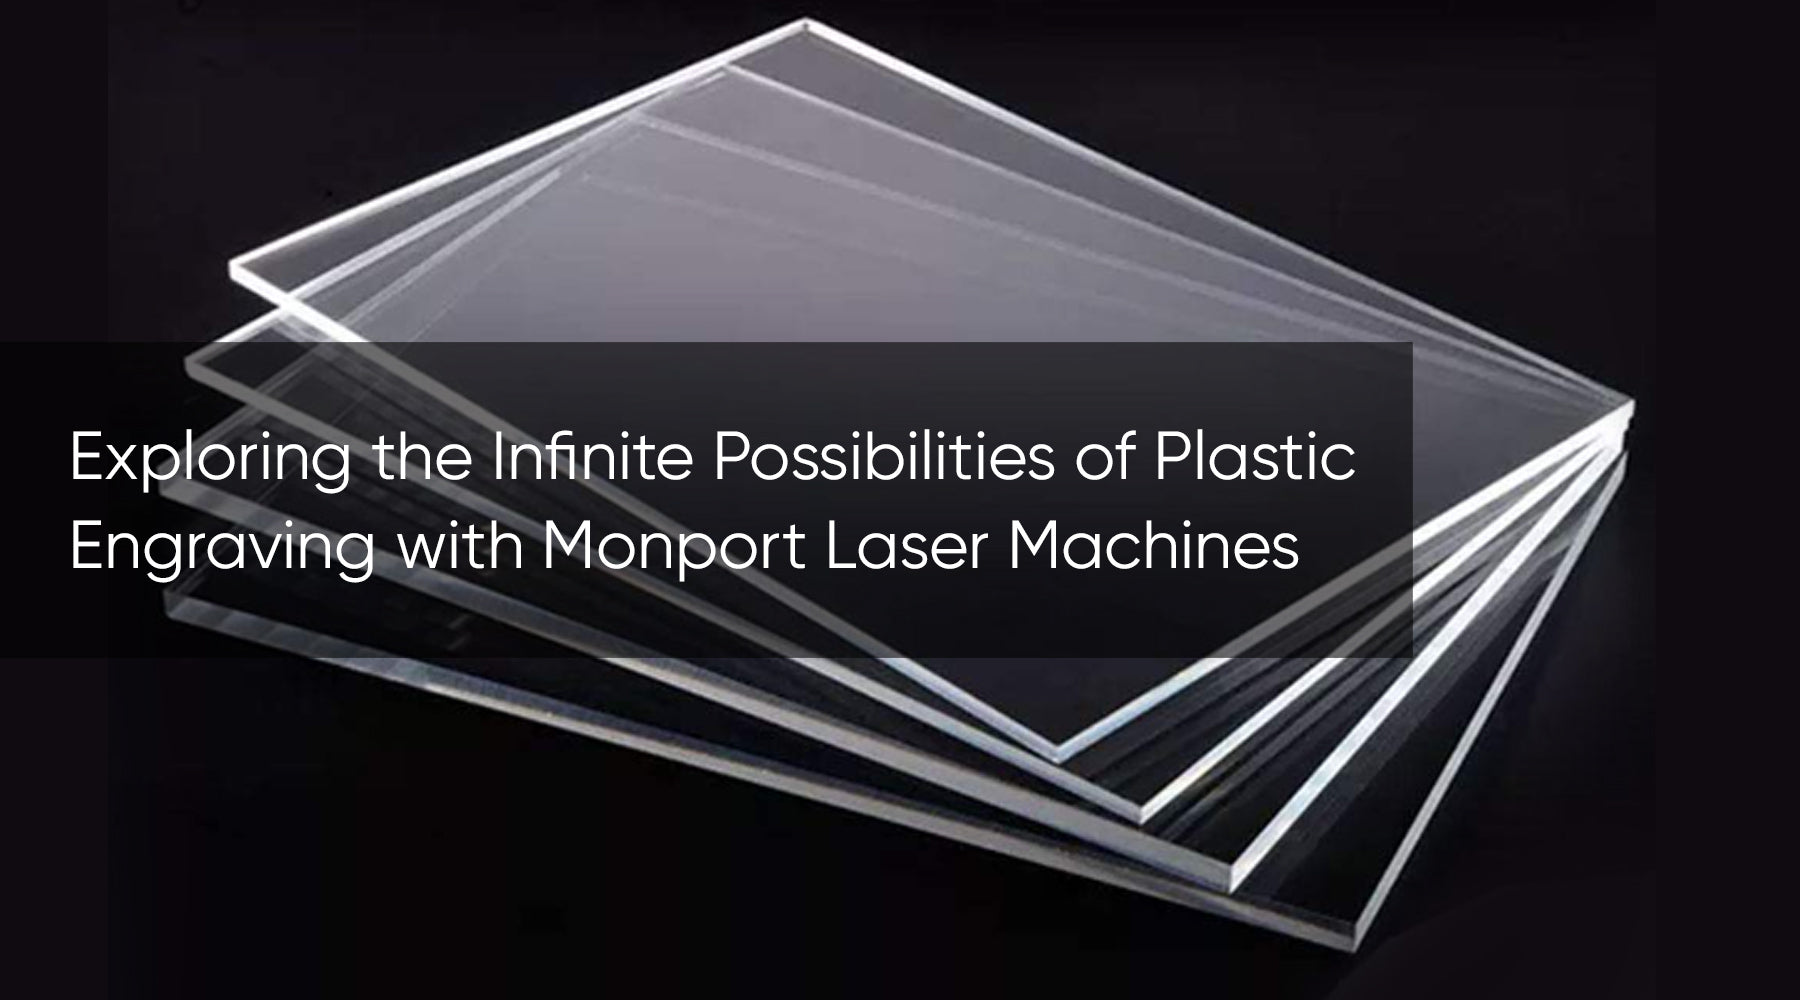 Exploring the Infinite Possibilities of Plastic Engraving with Monport Laser Machines